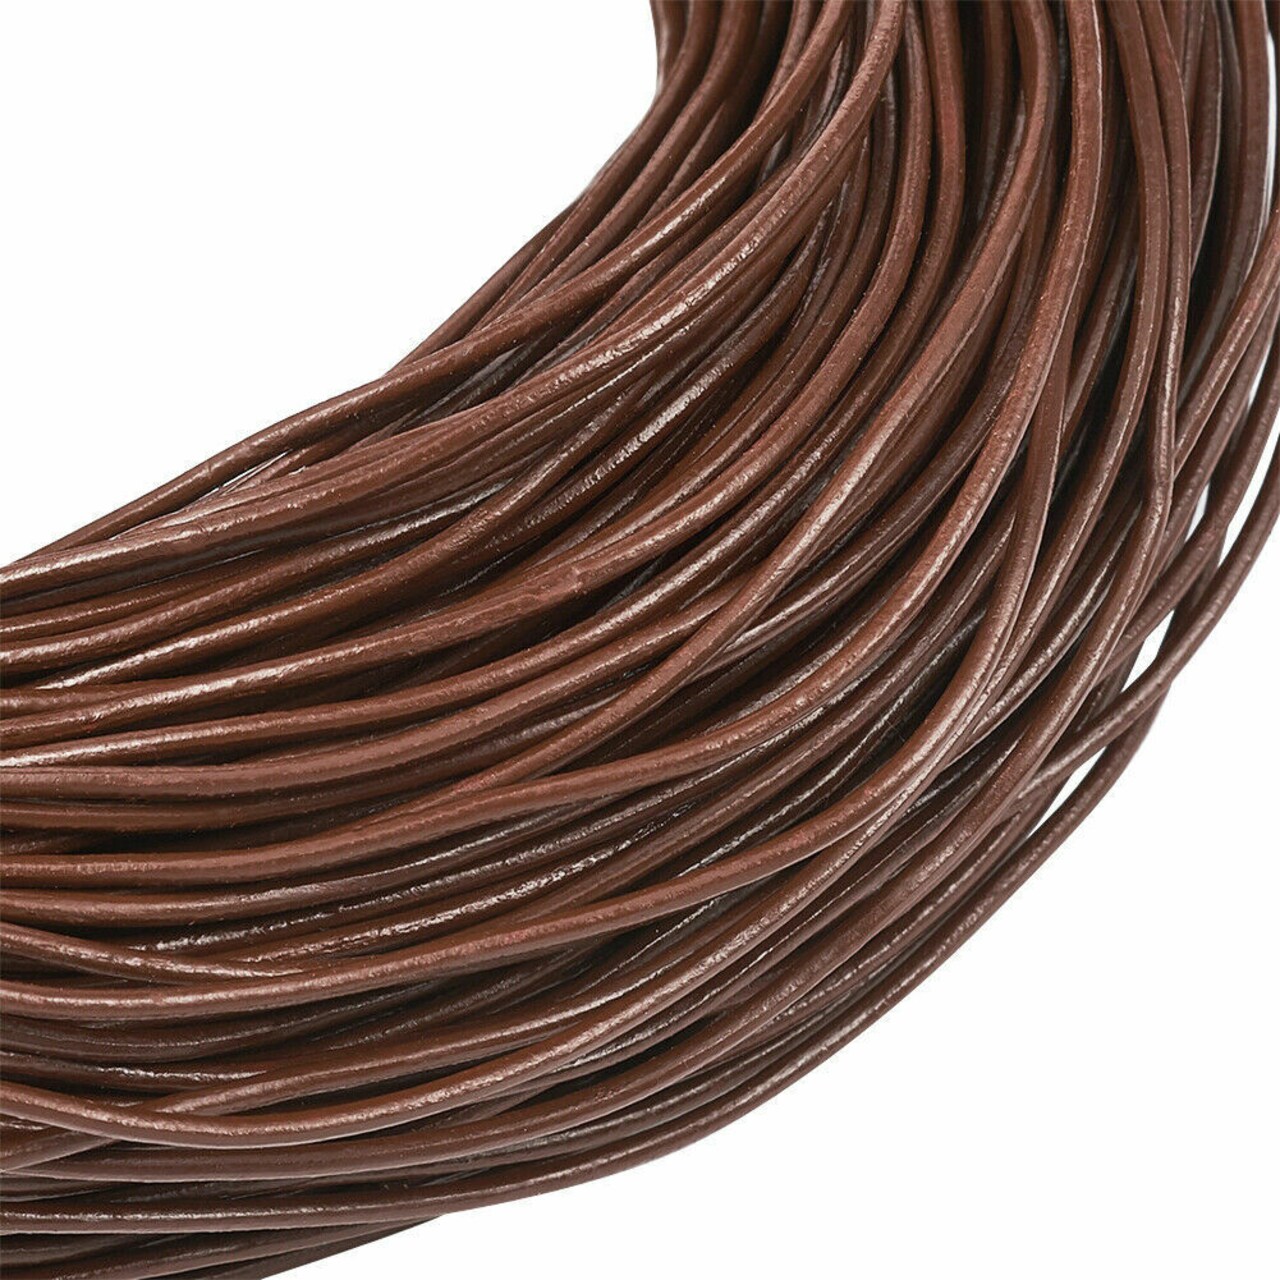 Kitcheniva 5 Yards Brown Cowhide Round Leather Cord String 1mm